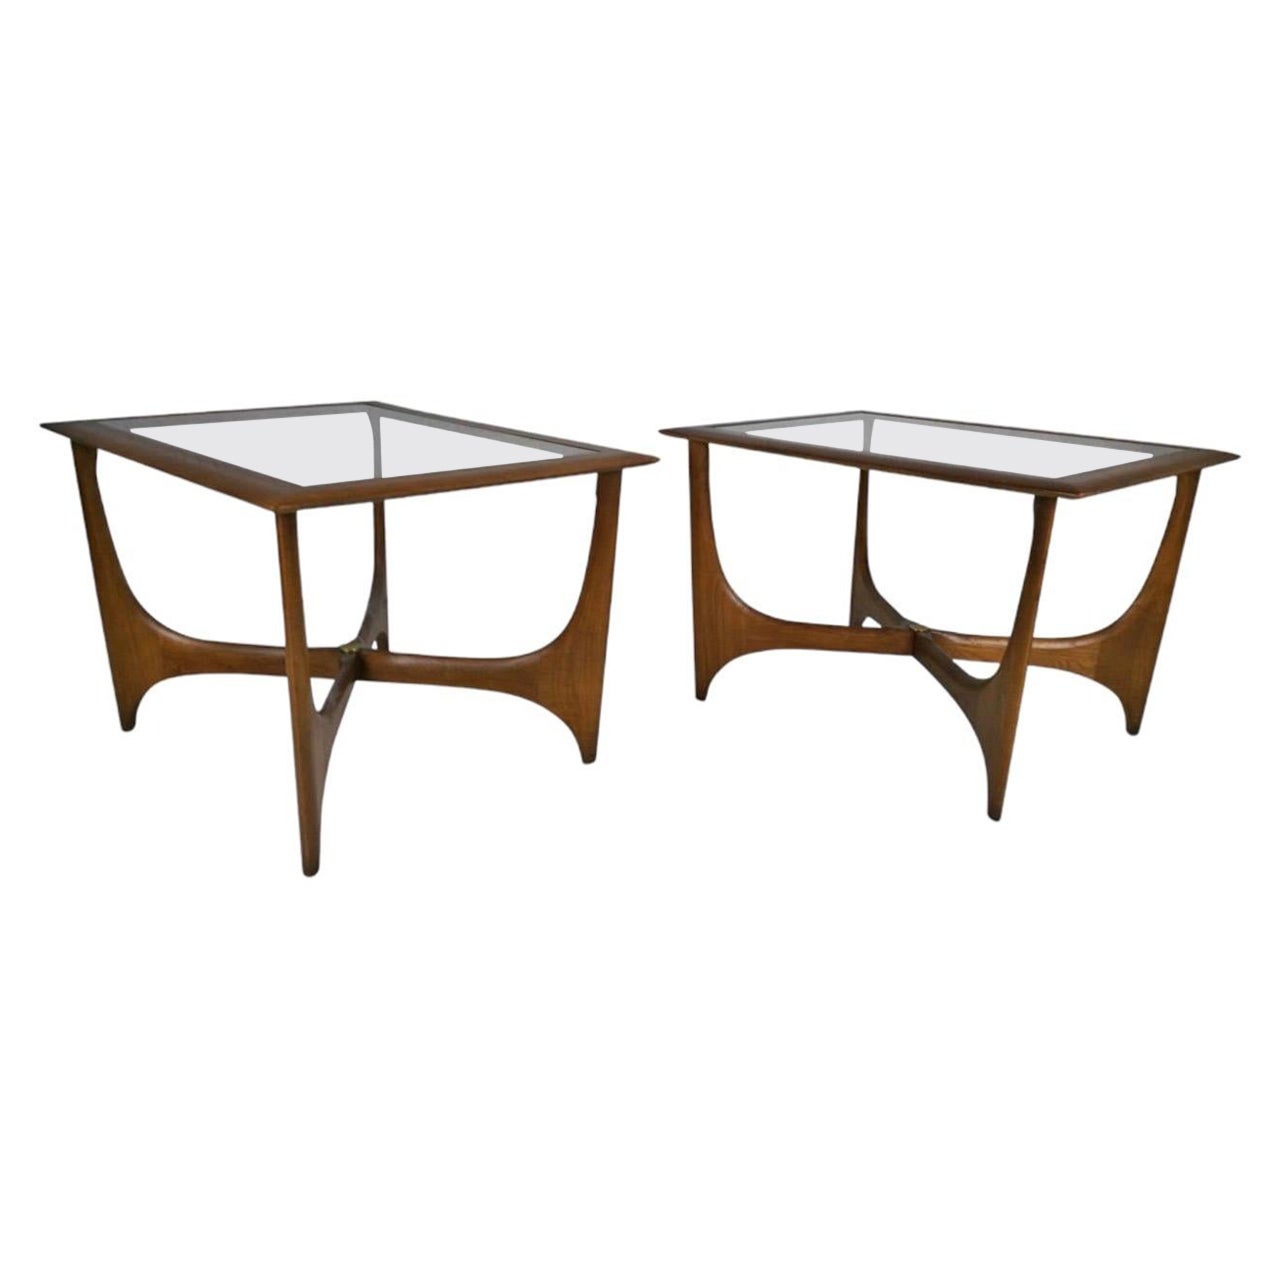 Vintage Mid-Century Modern Walnut and Glass End Tables by Lane, Set of 2 For Sale